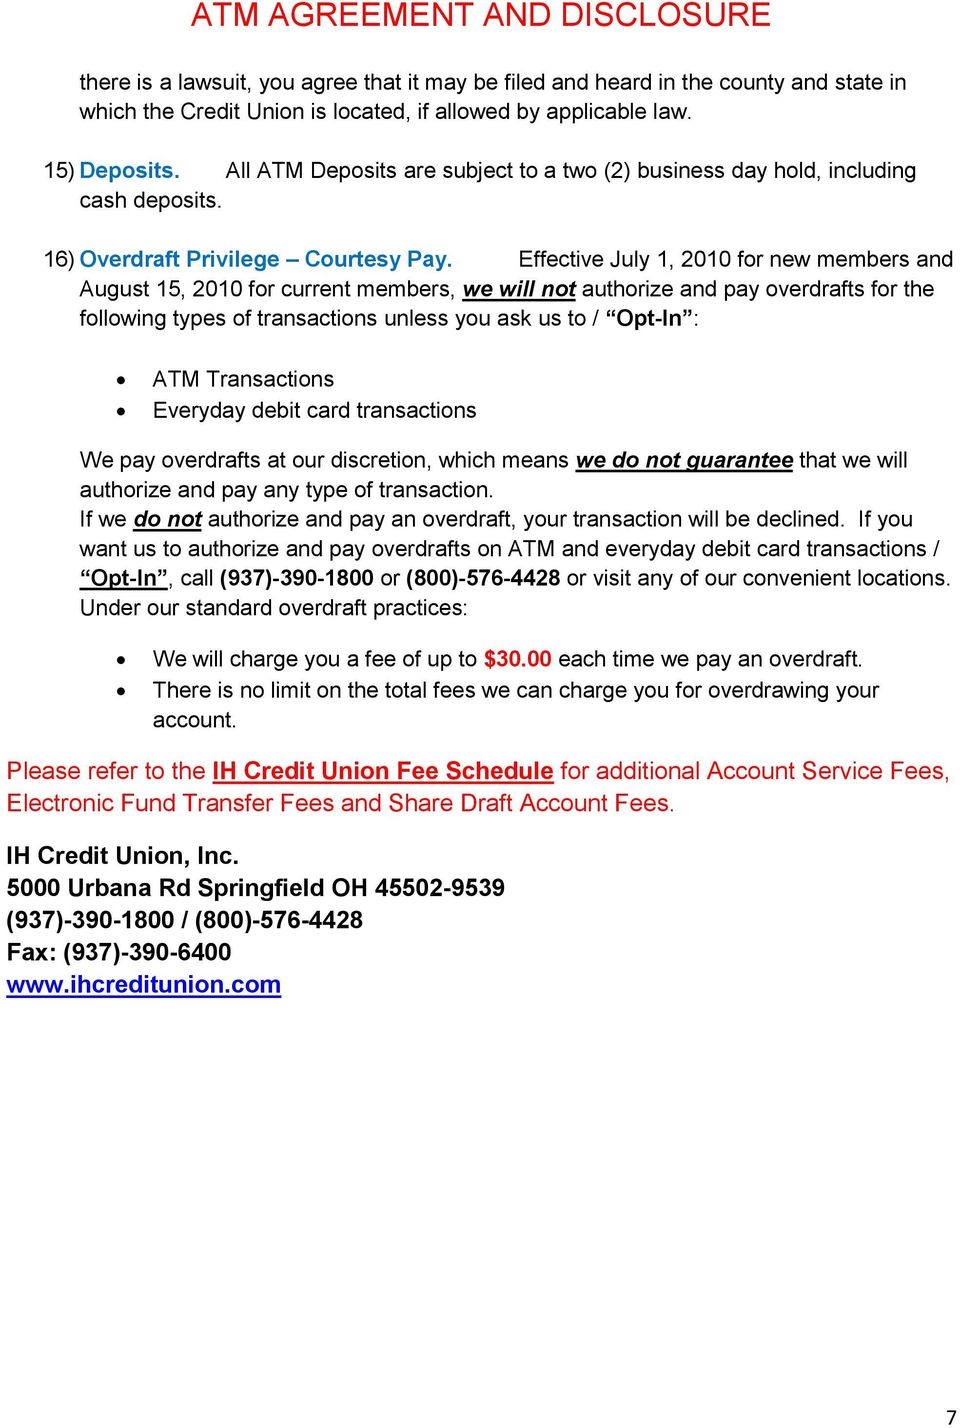 Effective July 1, 2010 for new members and August 15, 2010 for current members, we will not authorize and pay overdrafts for the following types of transactions unless you ask us to / Opt-In : ATM